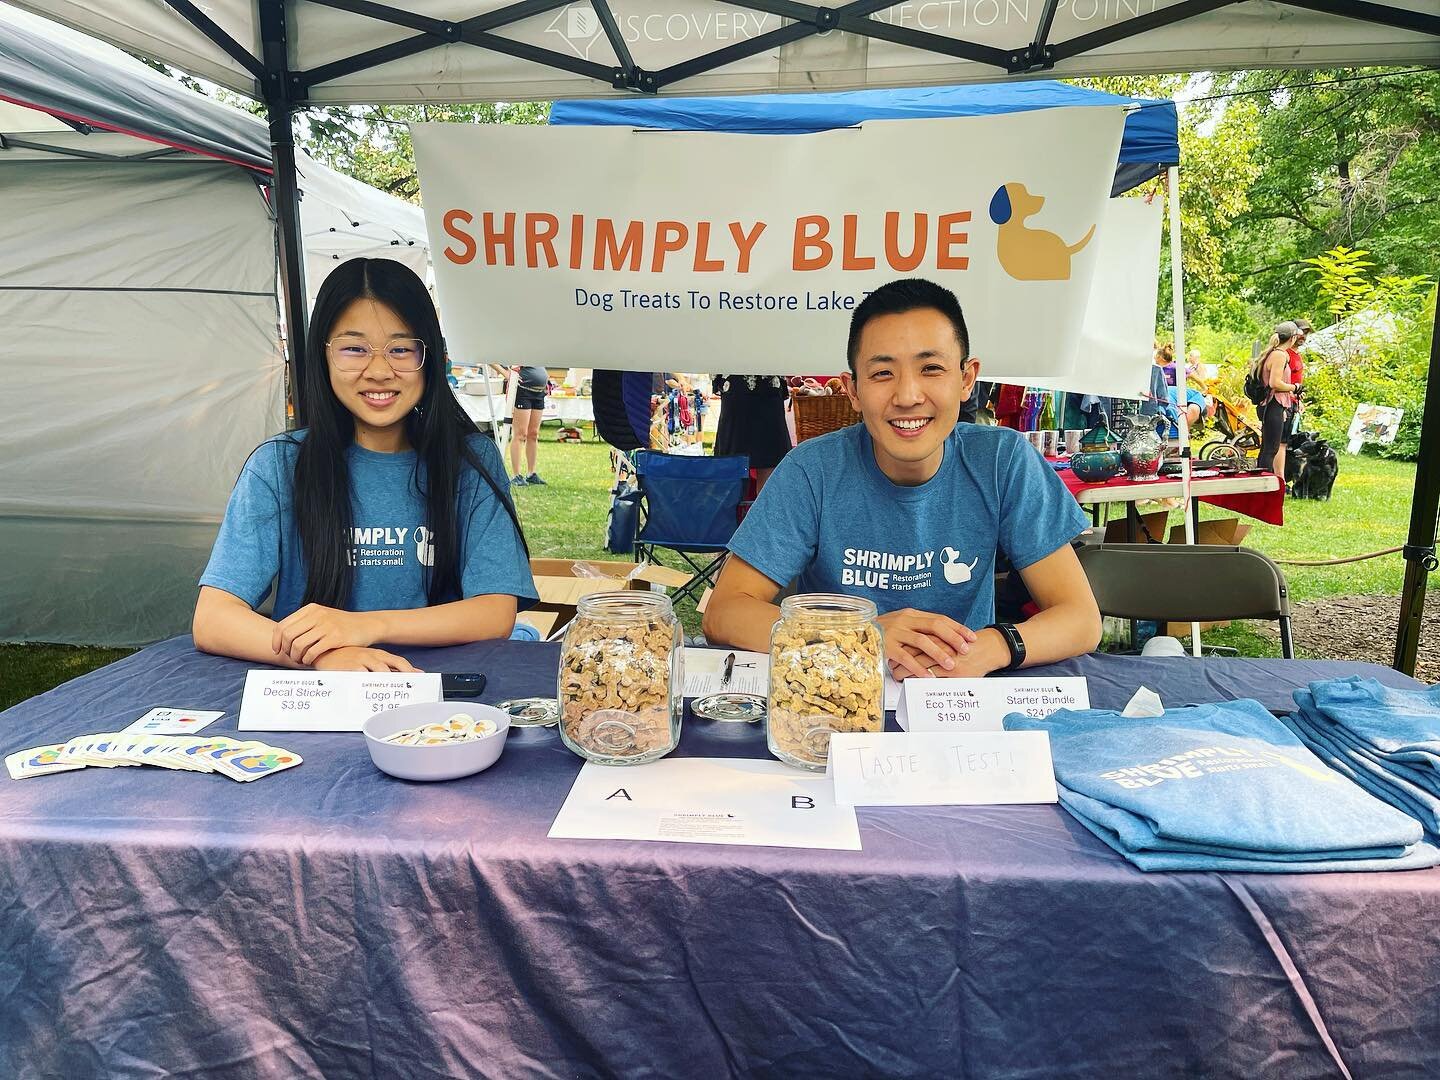 We had a great time at Art Paws over the weekend! The Shrimply Blue team got to meet so many locals from Reno &amp; Tahoe who care about the environment and clearing mysis shrimp from Lake Tahoe. Also, we met so many adorable dogs! Thank you, @artpaw